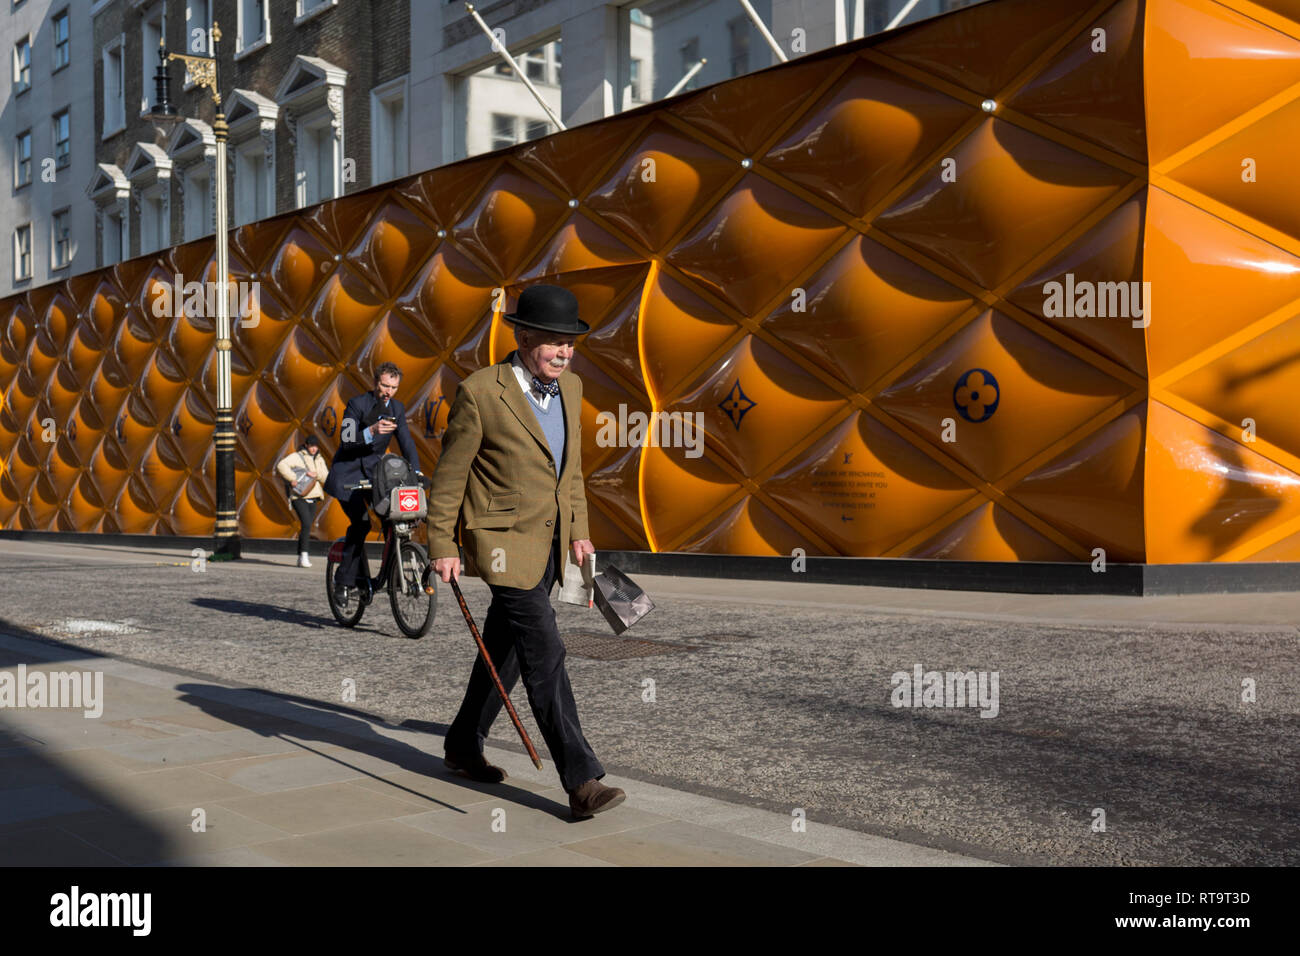 A classically-dressed English gentleman walks past the temporary renovation hoarding of luxury brand Louis Vuitton in New Bond Street, on 27th February 2019, in London, England. Stock Photo